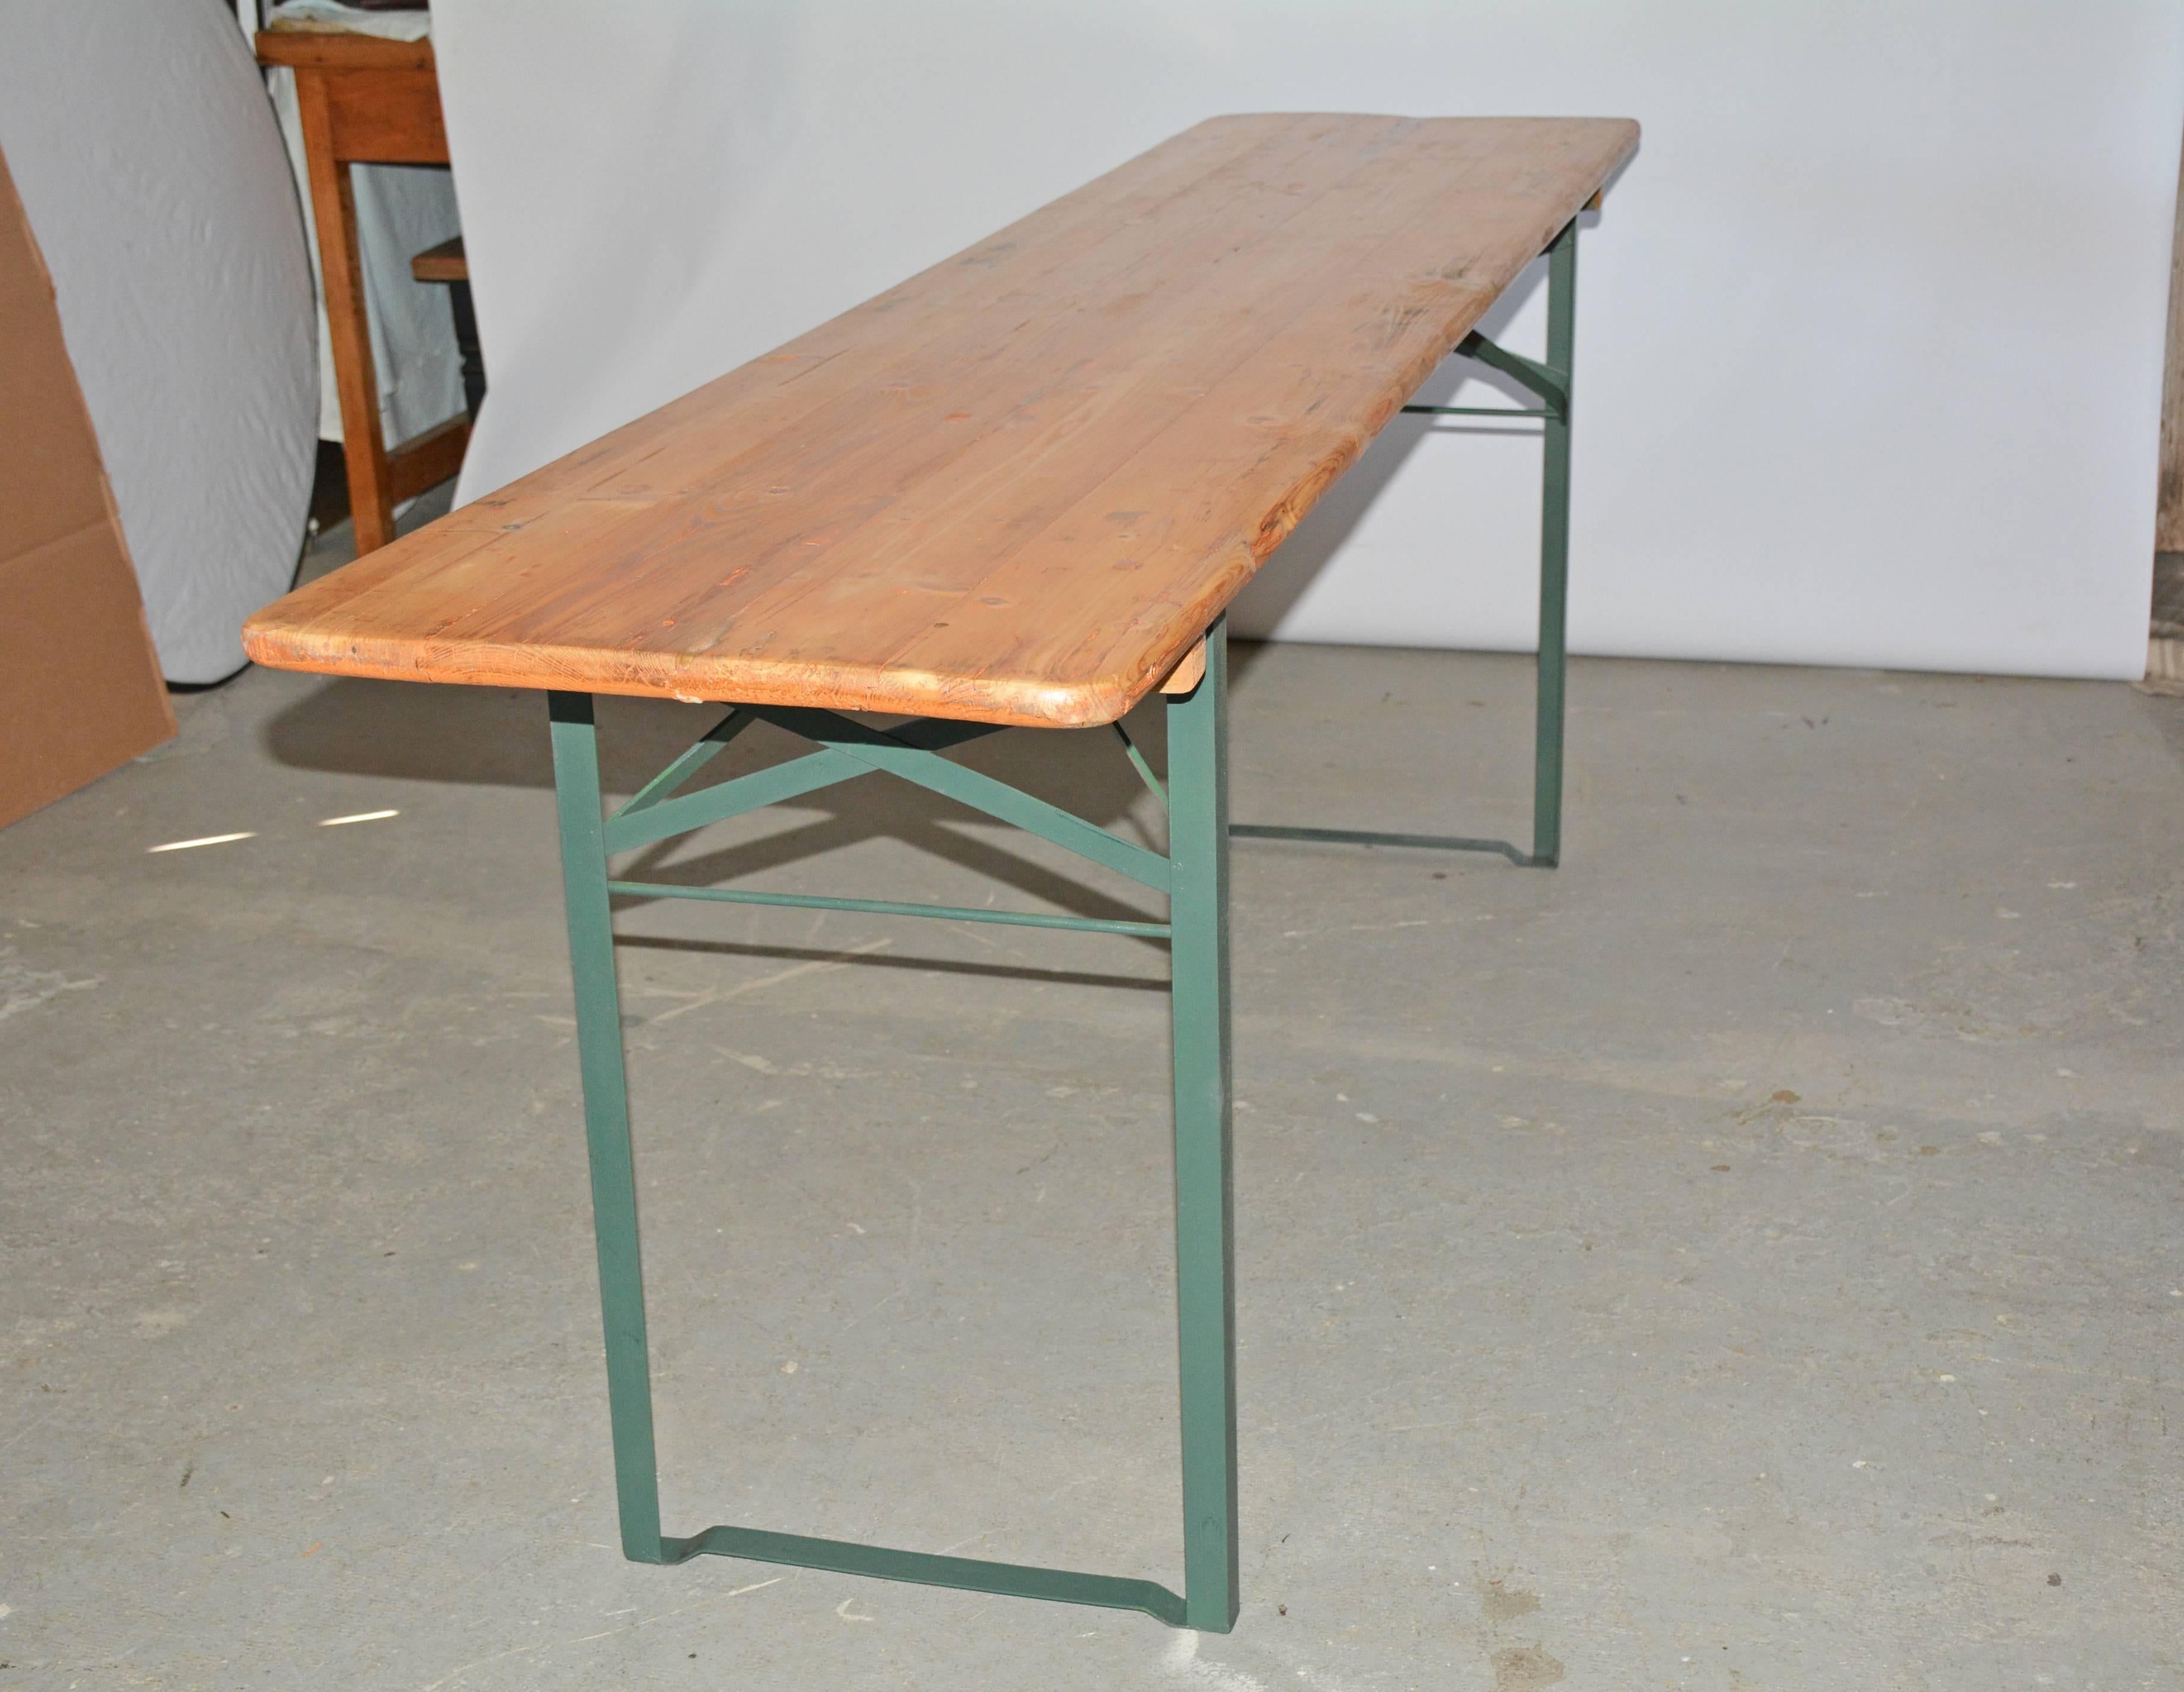 Authentic German beer hall folding table. Pair of matching folding benches available. Bench dimensions: 11